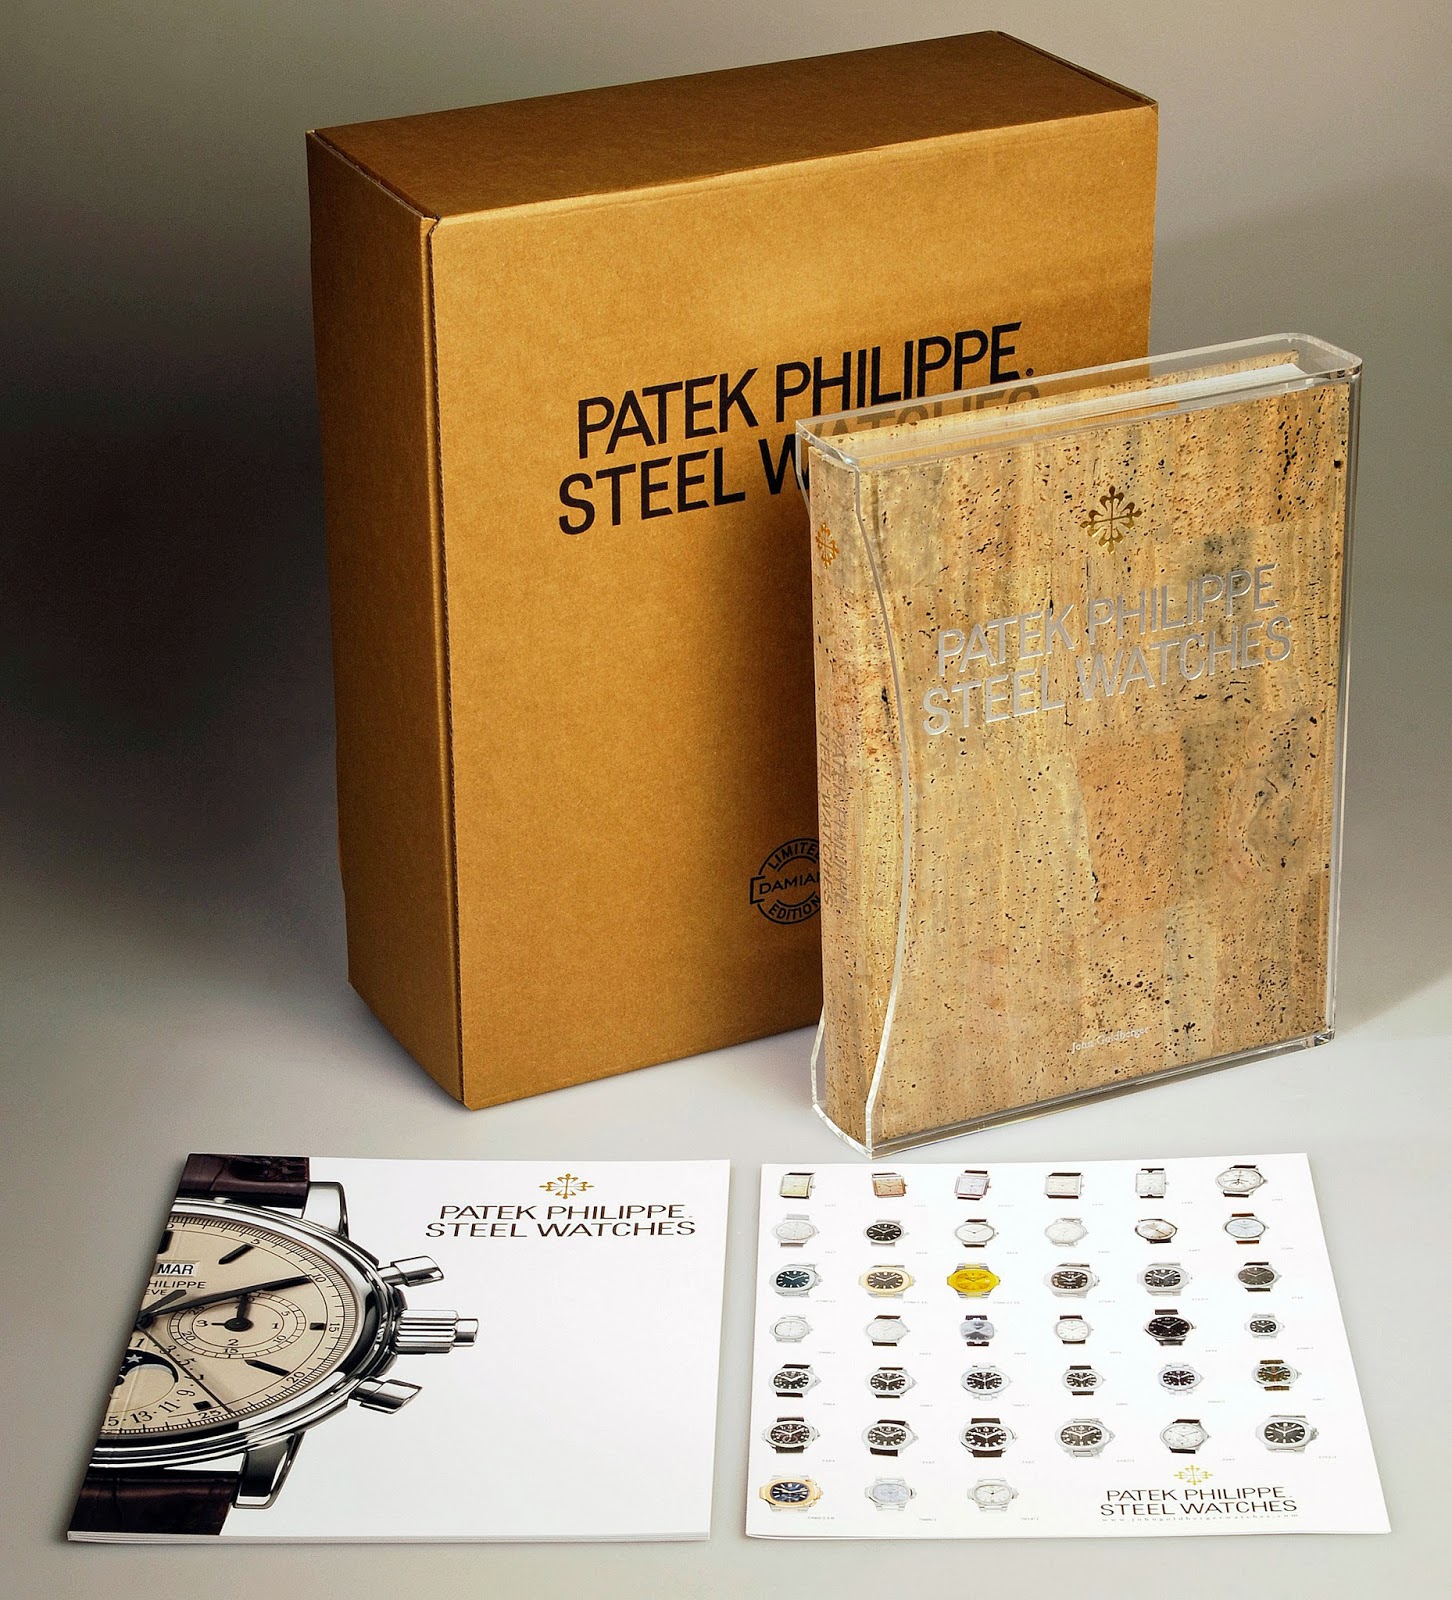 PATEK PHILIPPE STEEL WATCHES Limited Edition